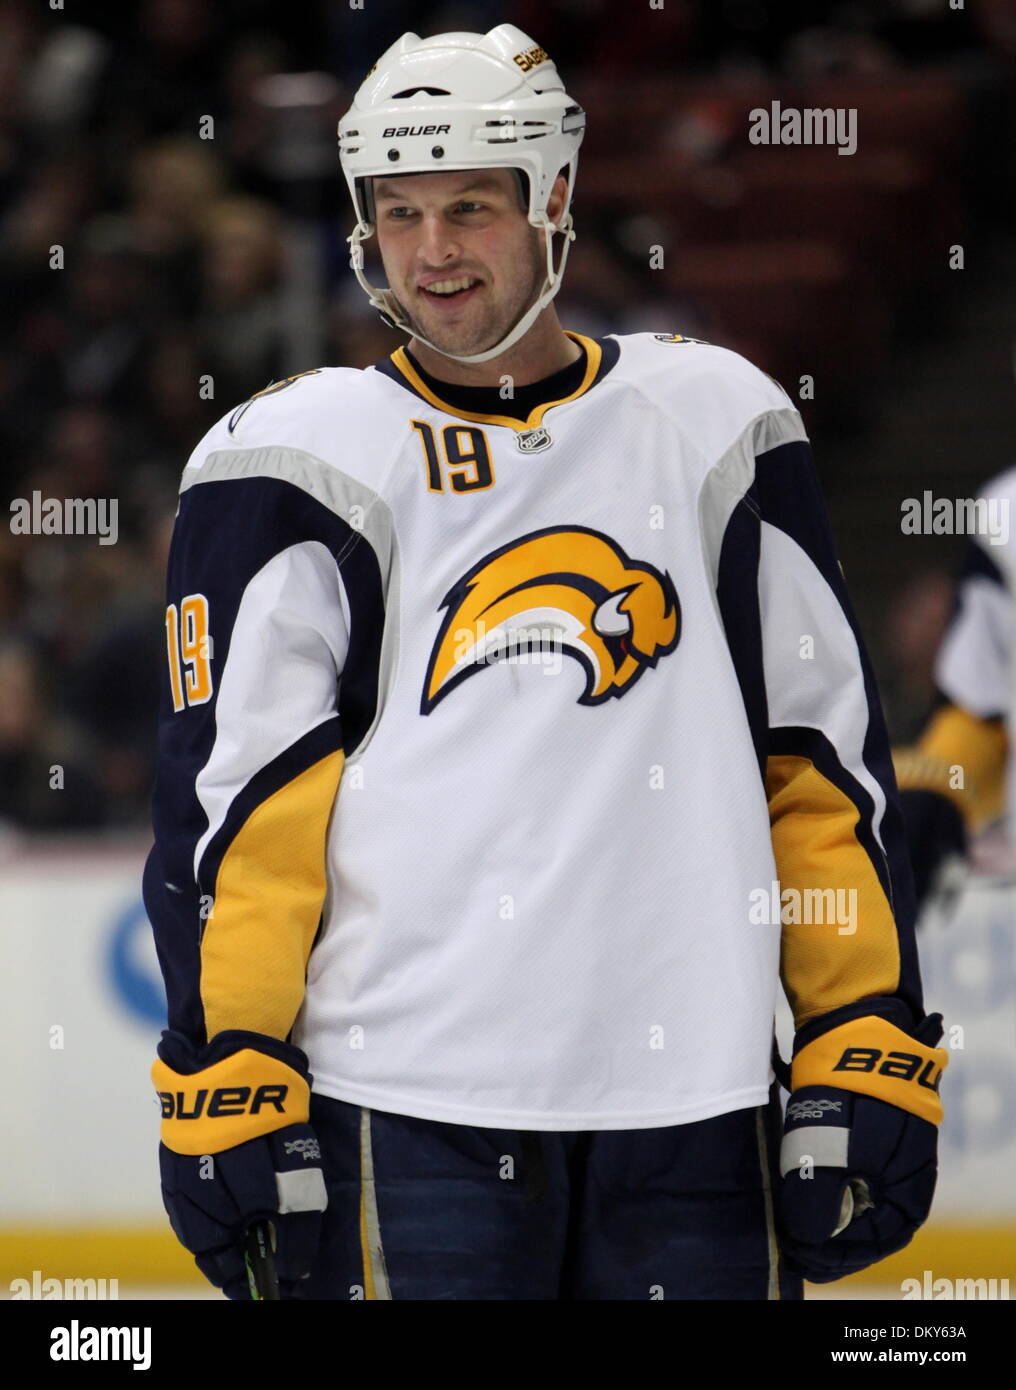 Jan 19, 2010 - Anaheim, California, USA - Buffalo Sabres center Tim Connolly  is pictured during an NHL